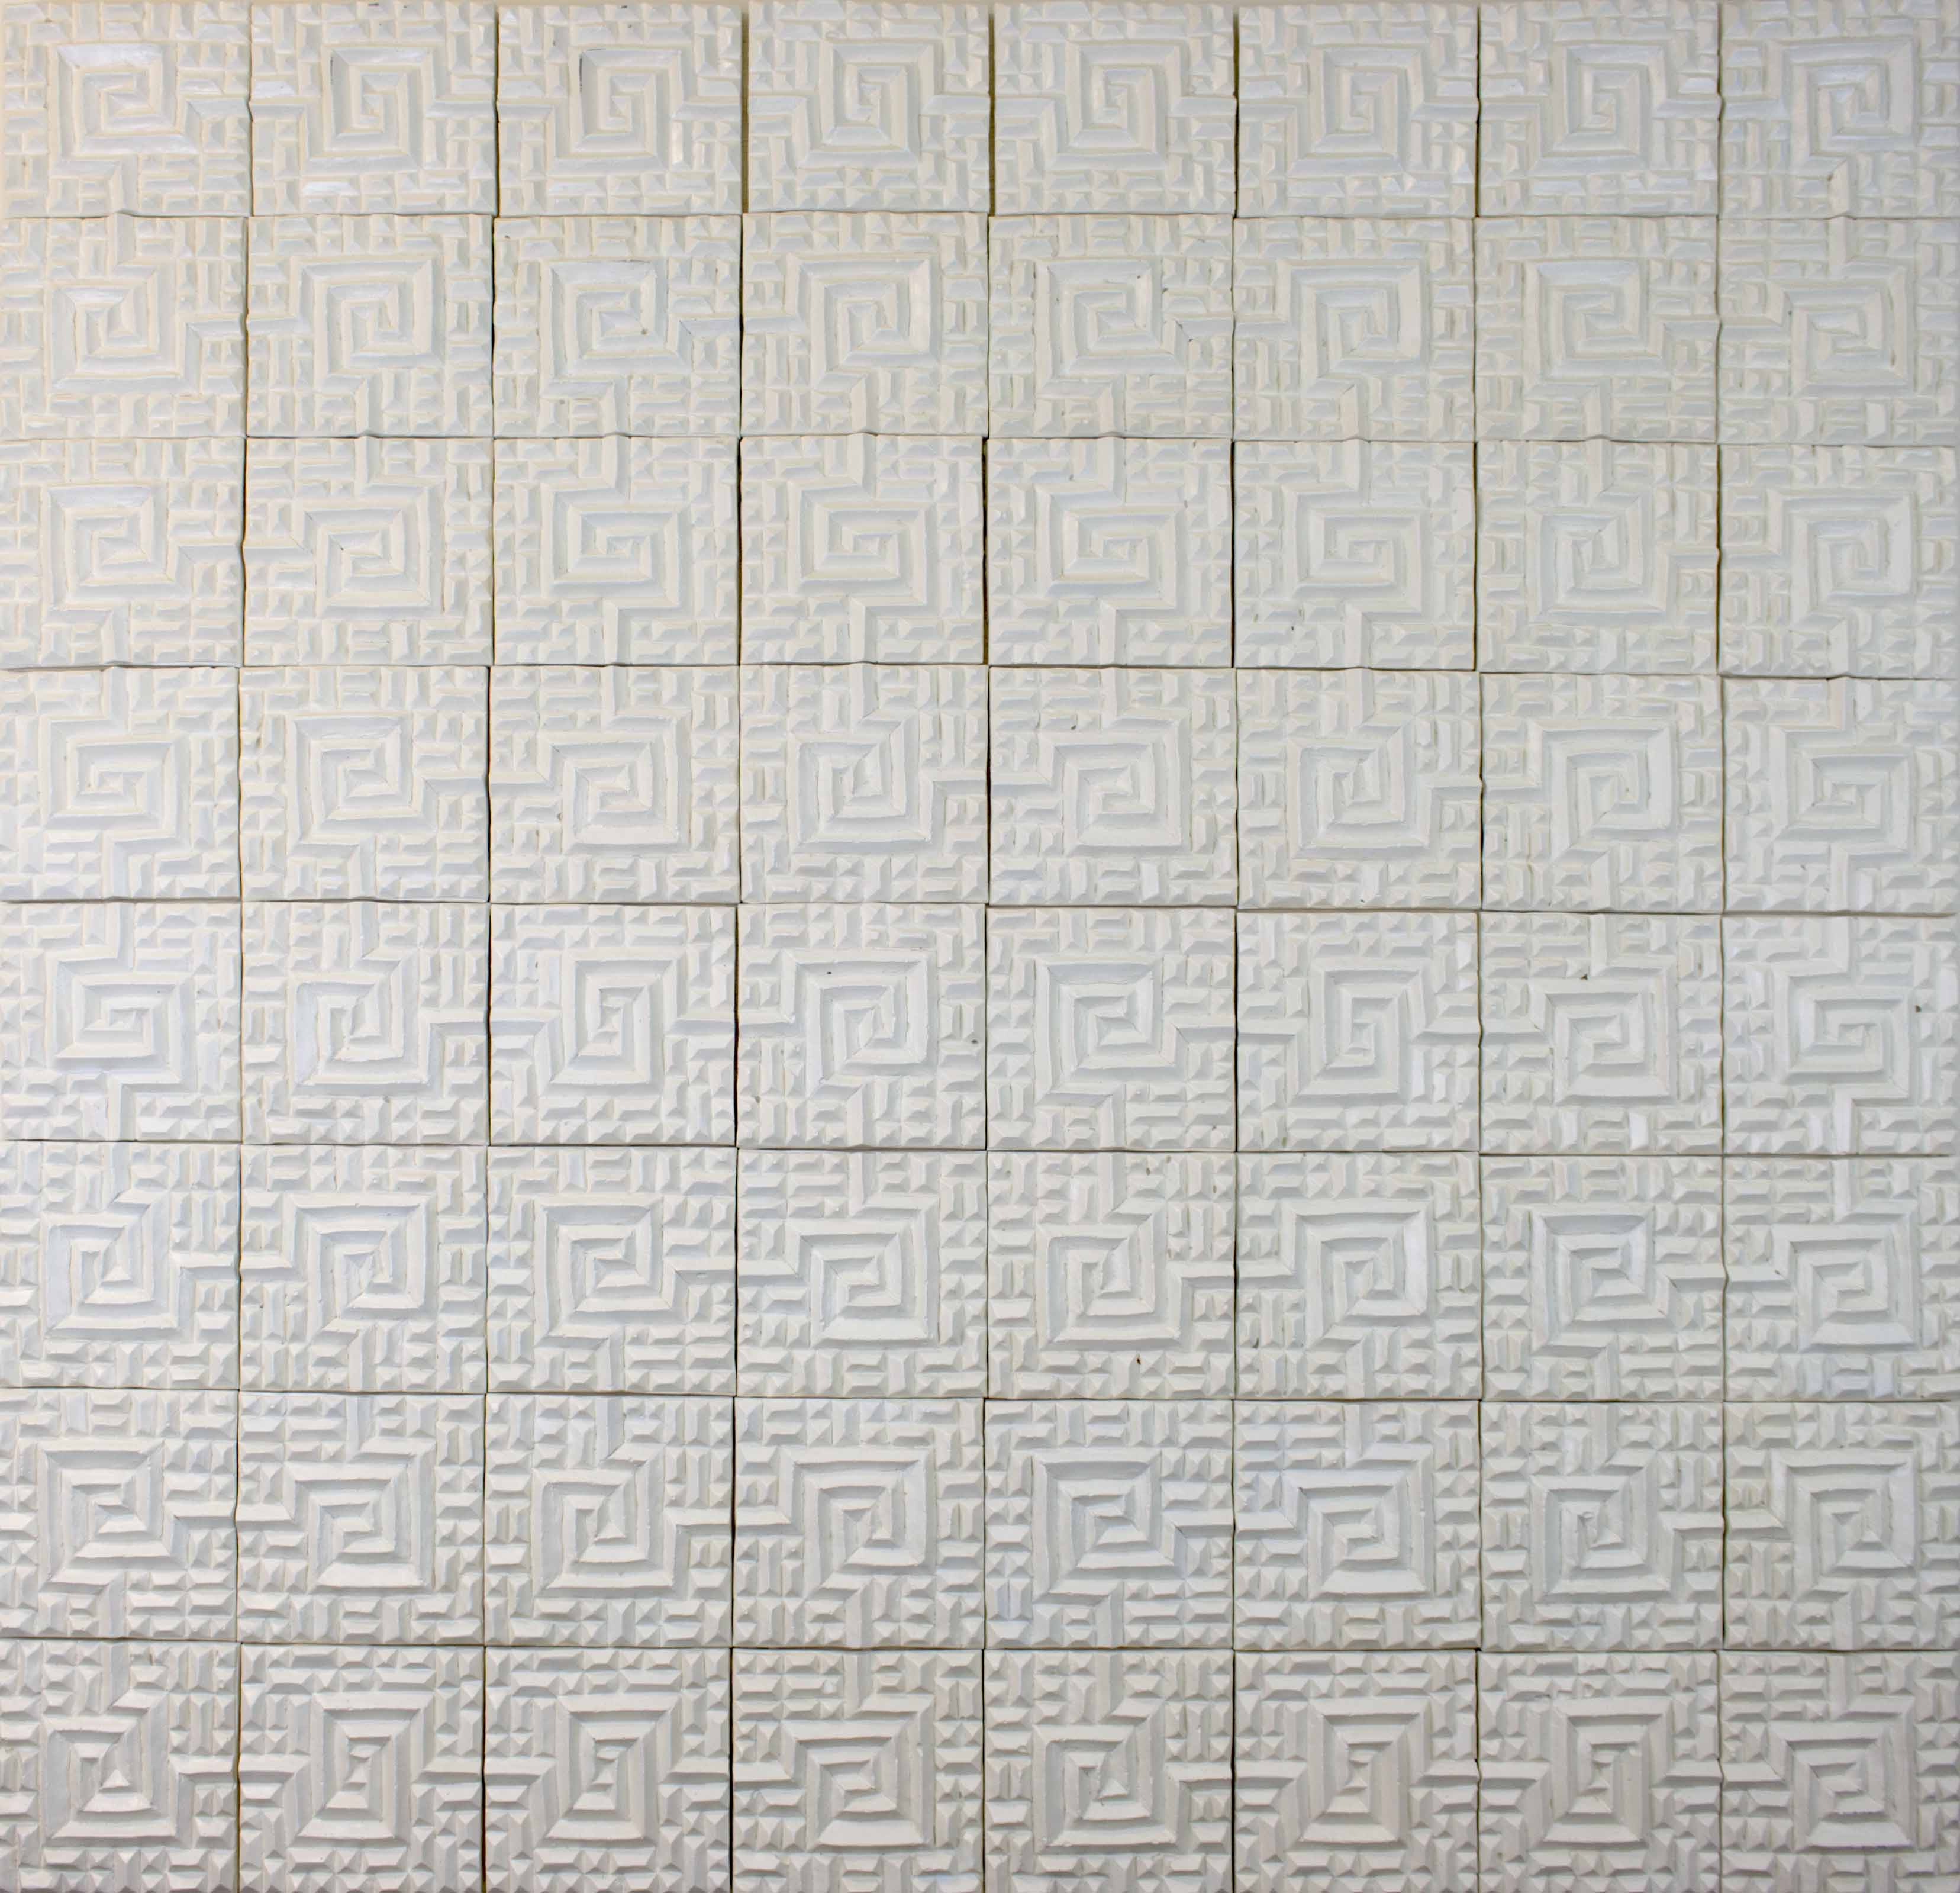 This is a white tessellation of repeating decorated squares. It has eight tiles going down and across. The base plywood board is painted white. 